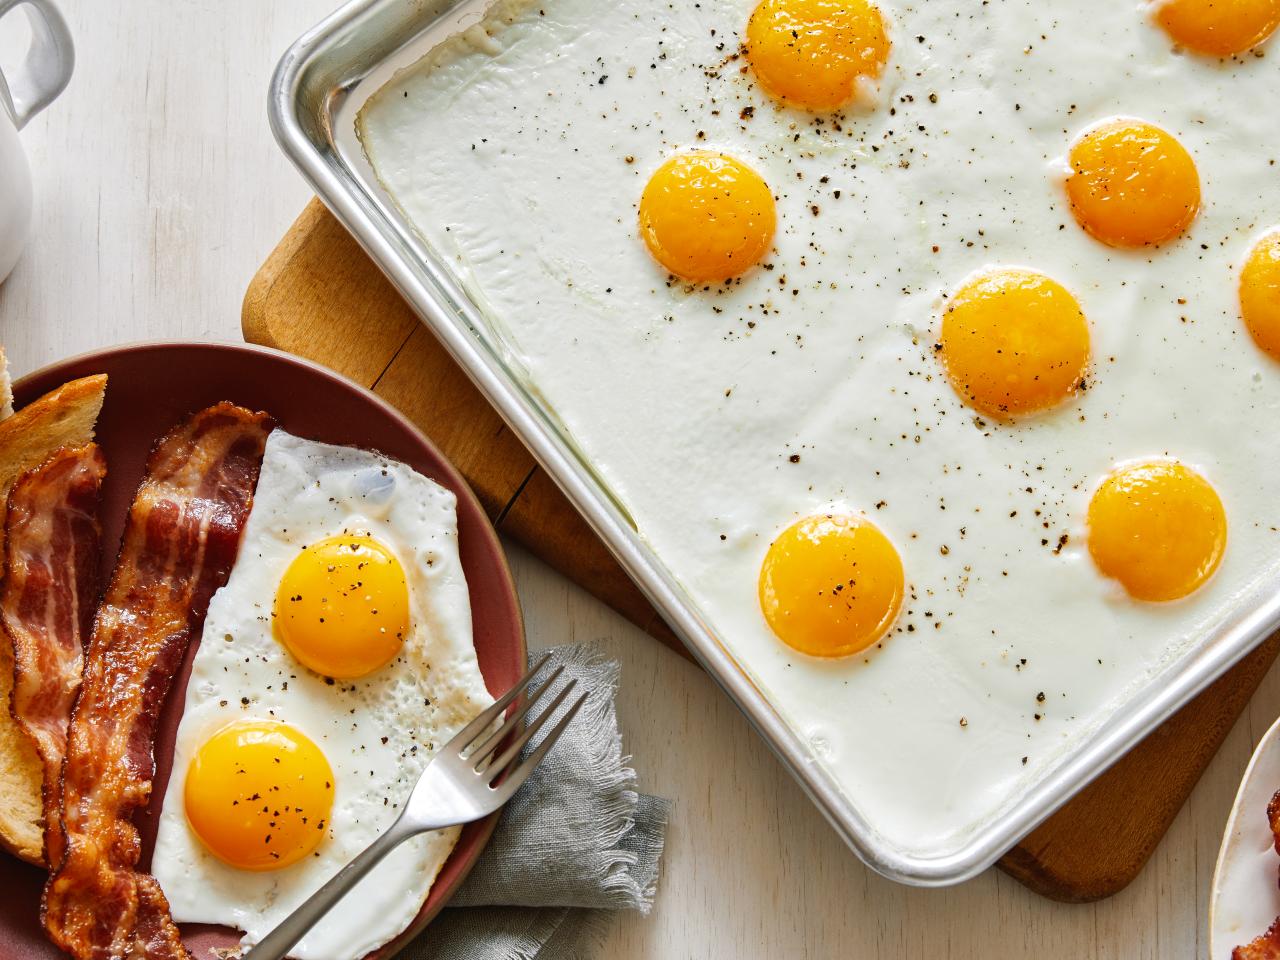 Sheet Pan Eggs - The Country Cook